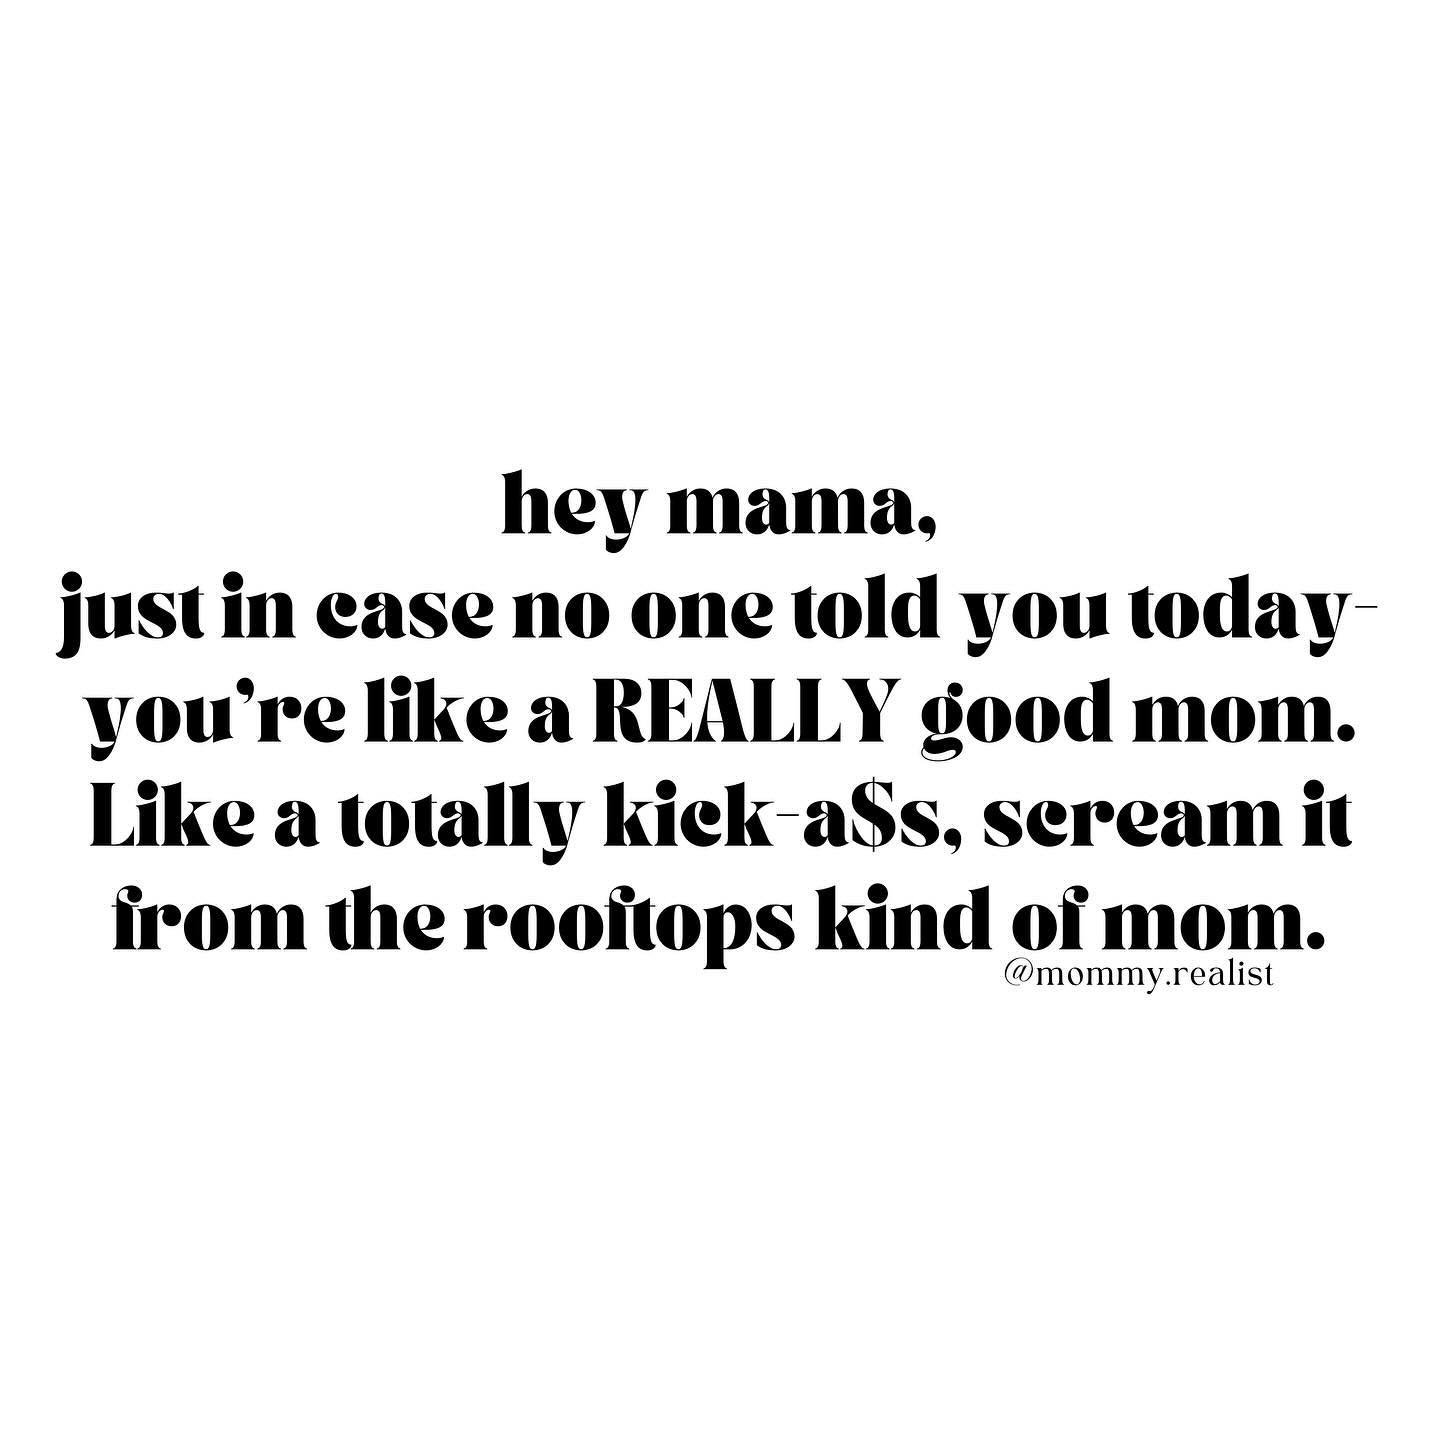 Friendly reminder ❤️

Tag a mama who needs to hear this today 👇:

#motherhood #mama #honestlymothering #goodmom #momssupportingmoms #momlife #honestmom #momtruths